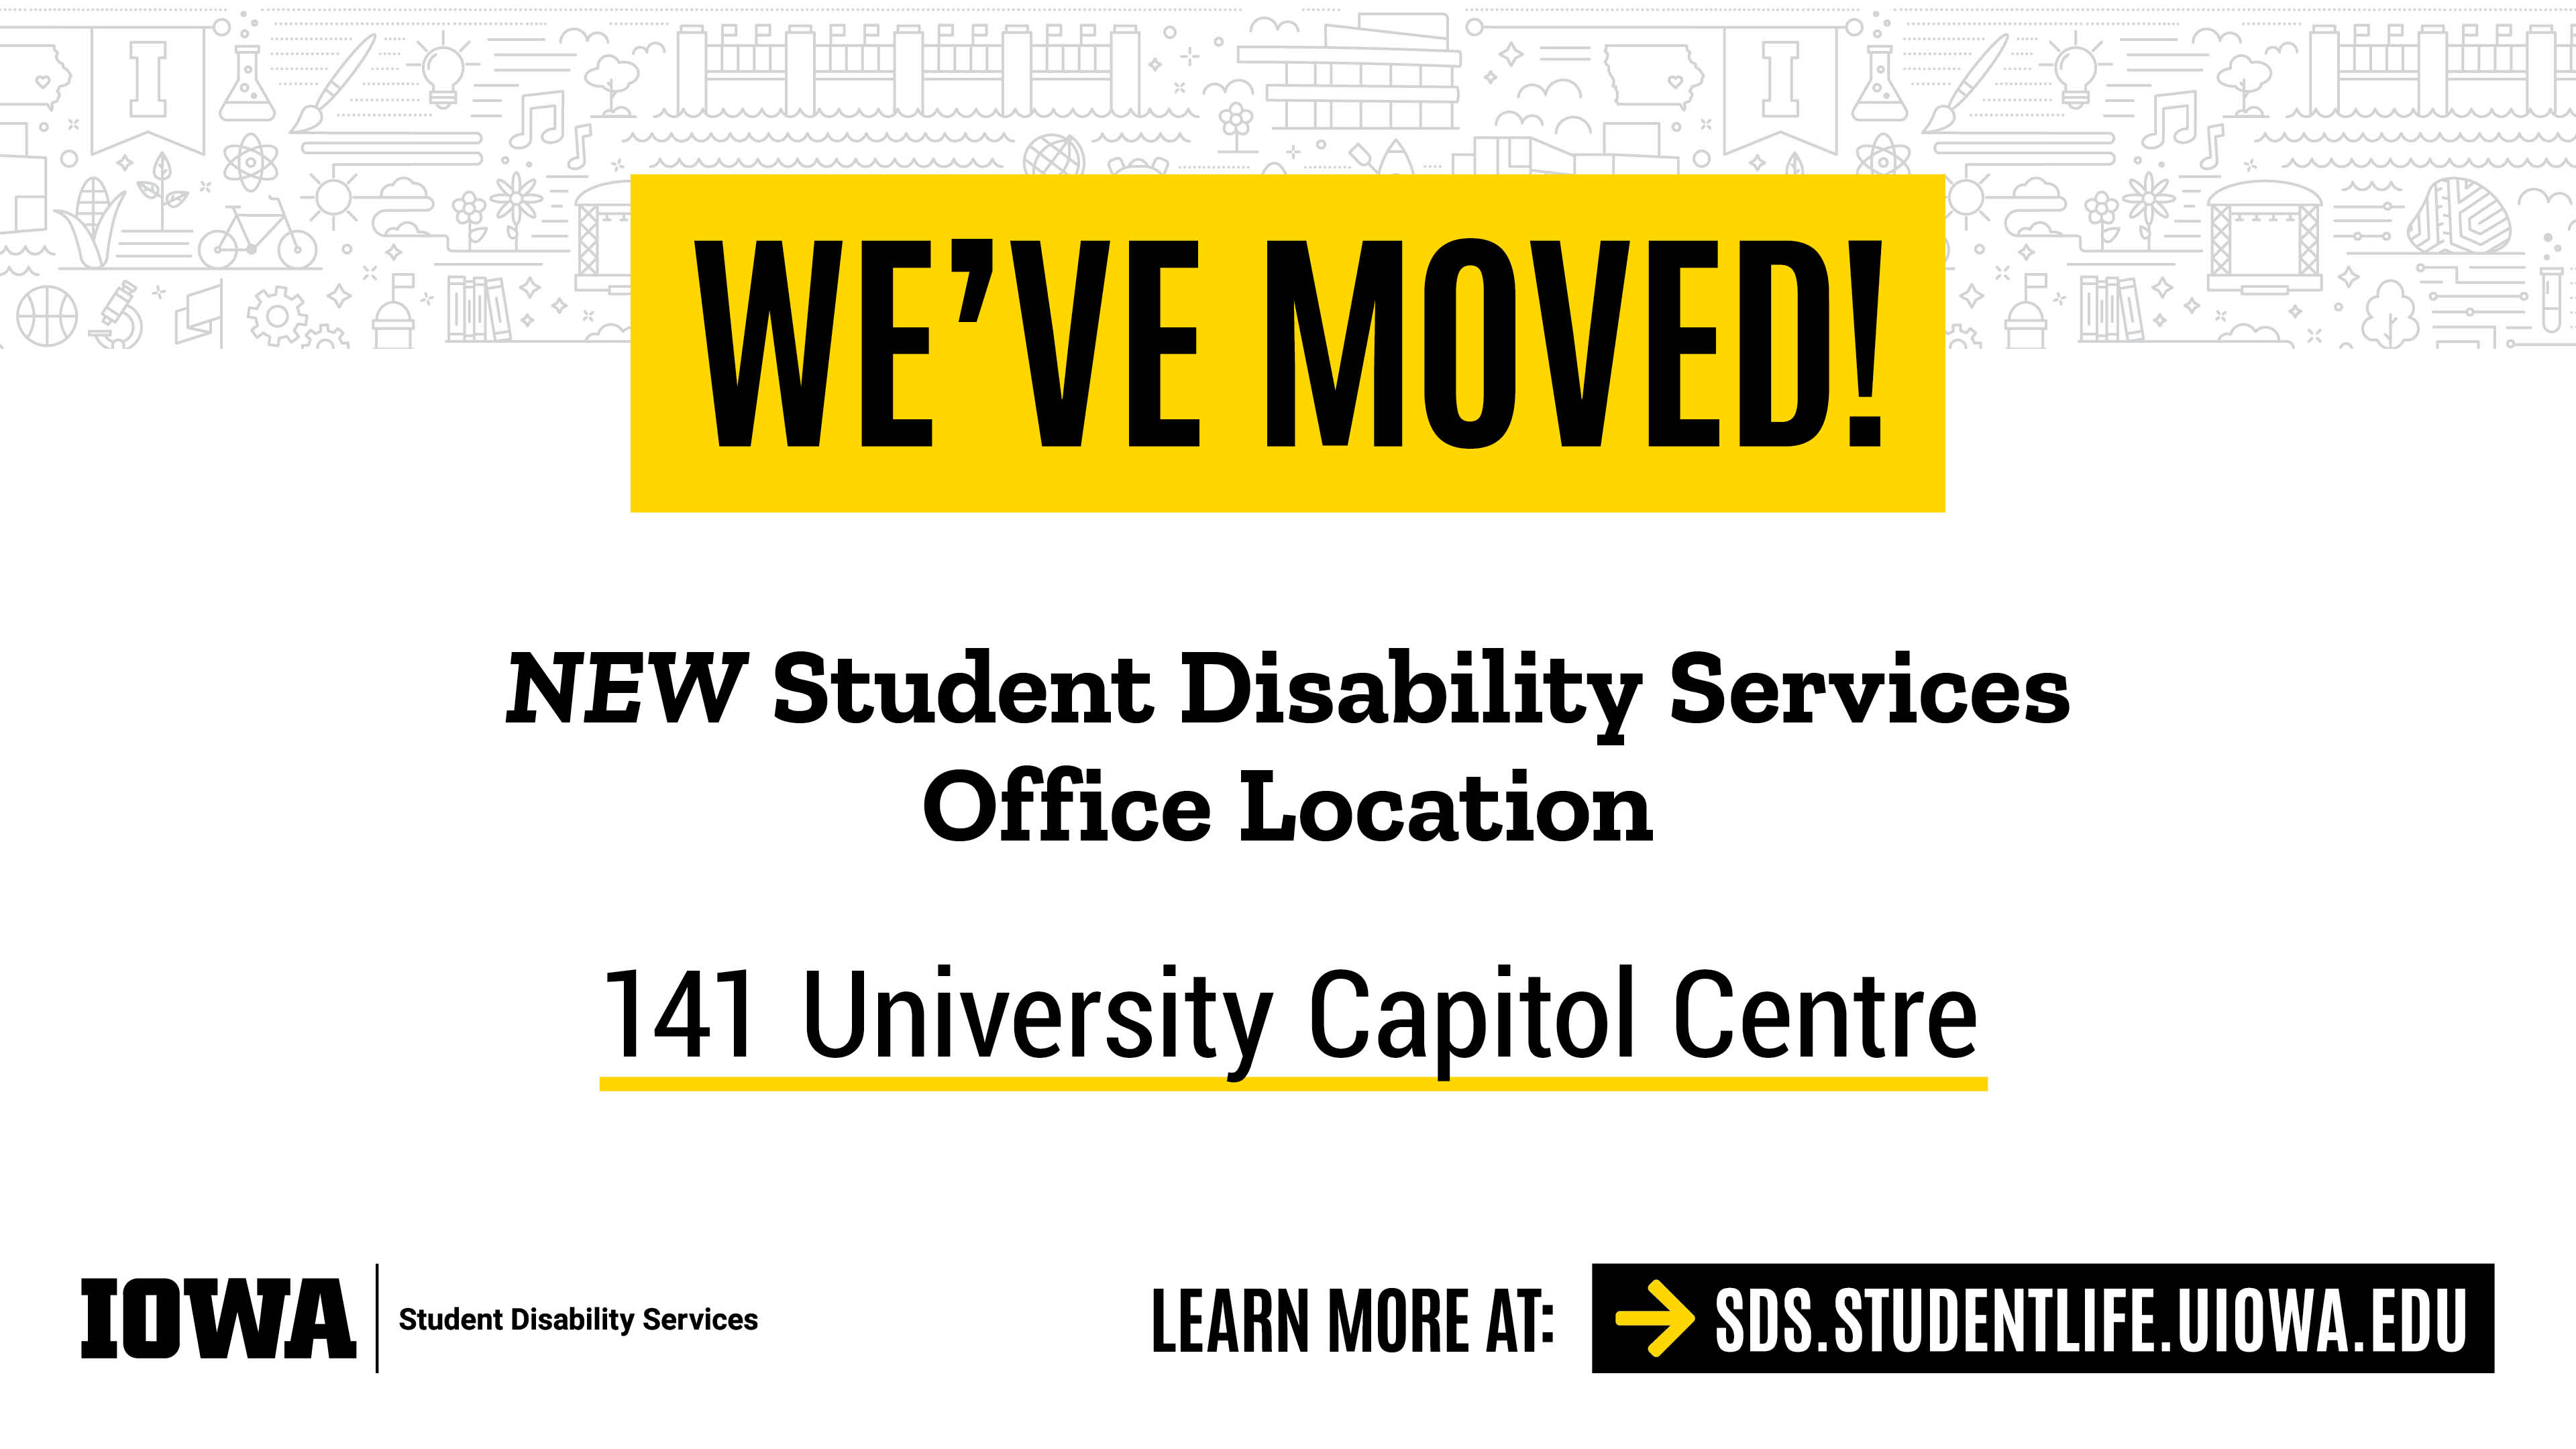 New location of Student Disability Services office is 141 University Capitol Centre